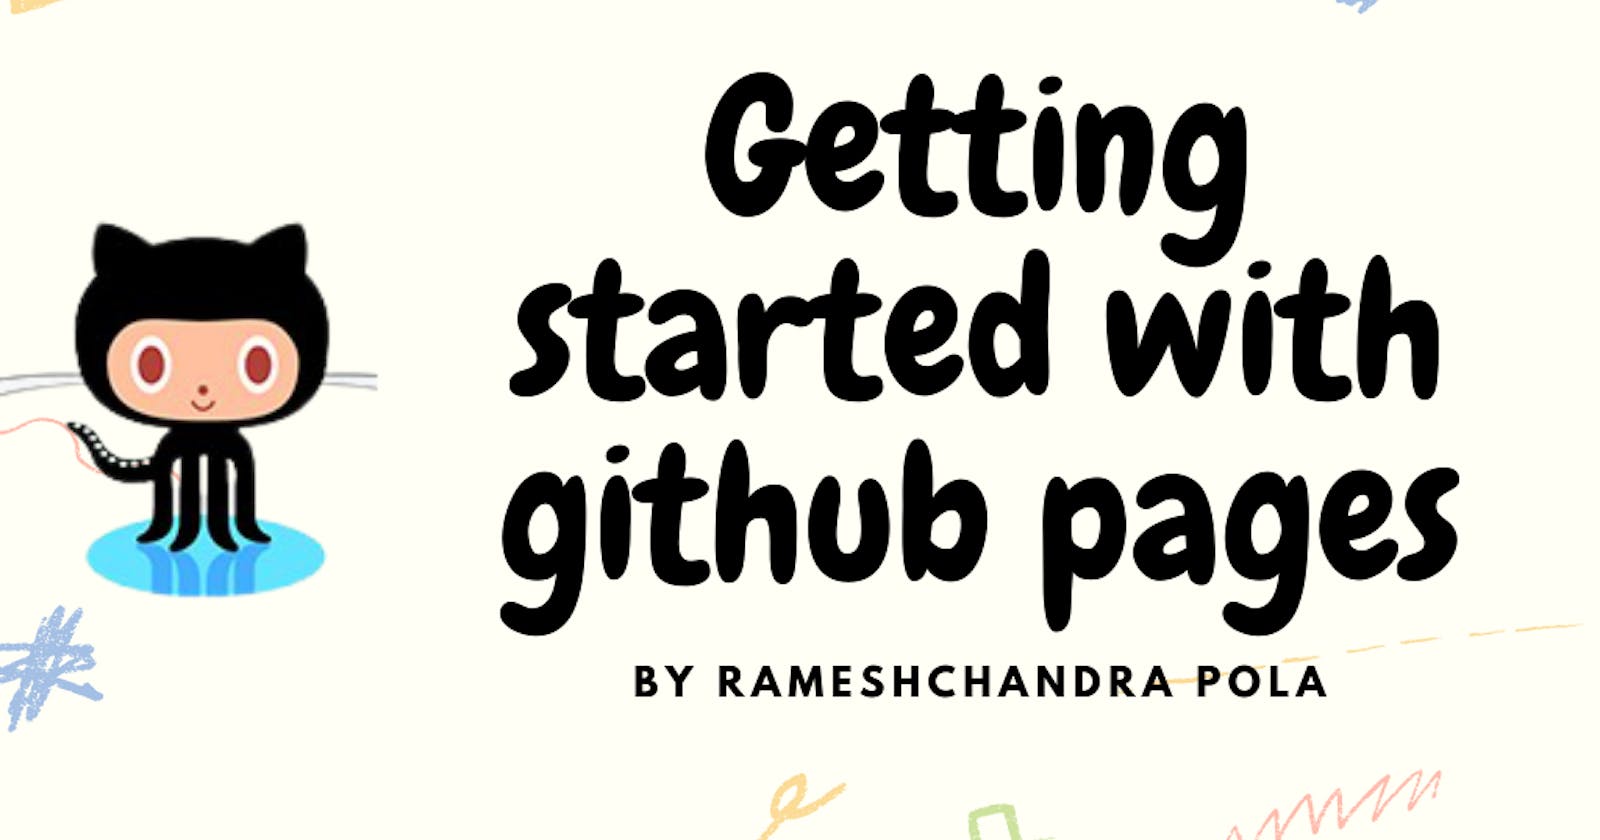 Getting started with GitHub pages